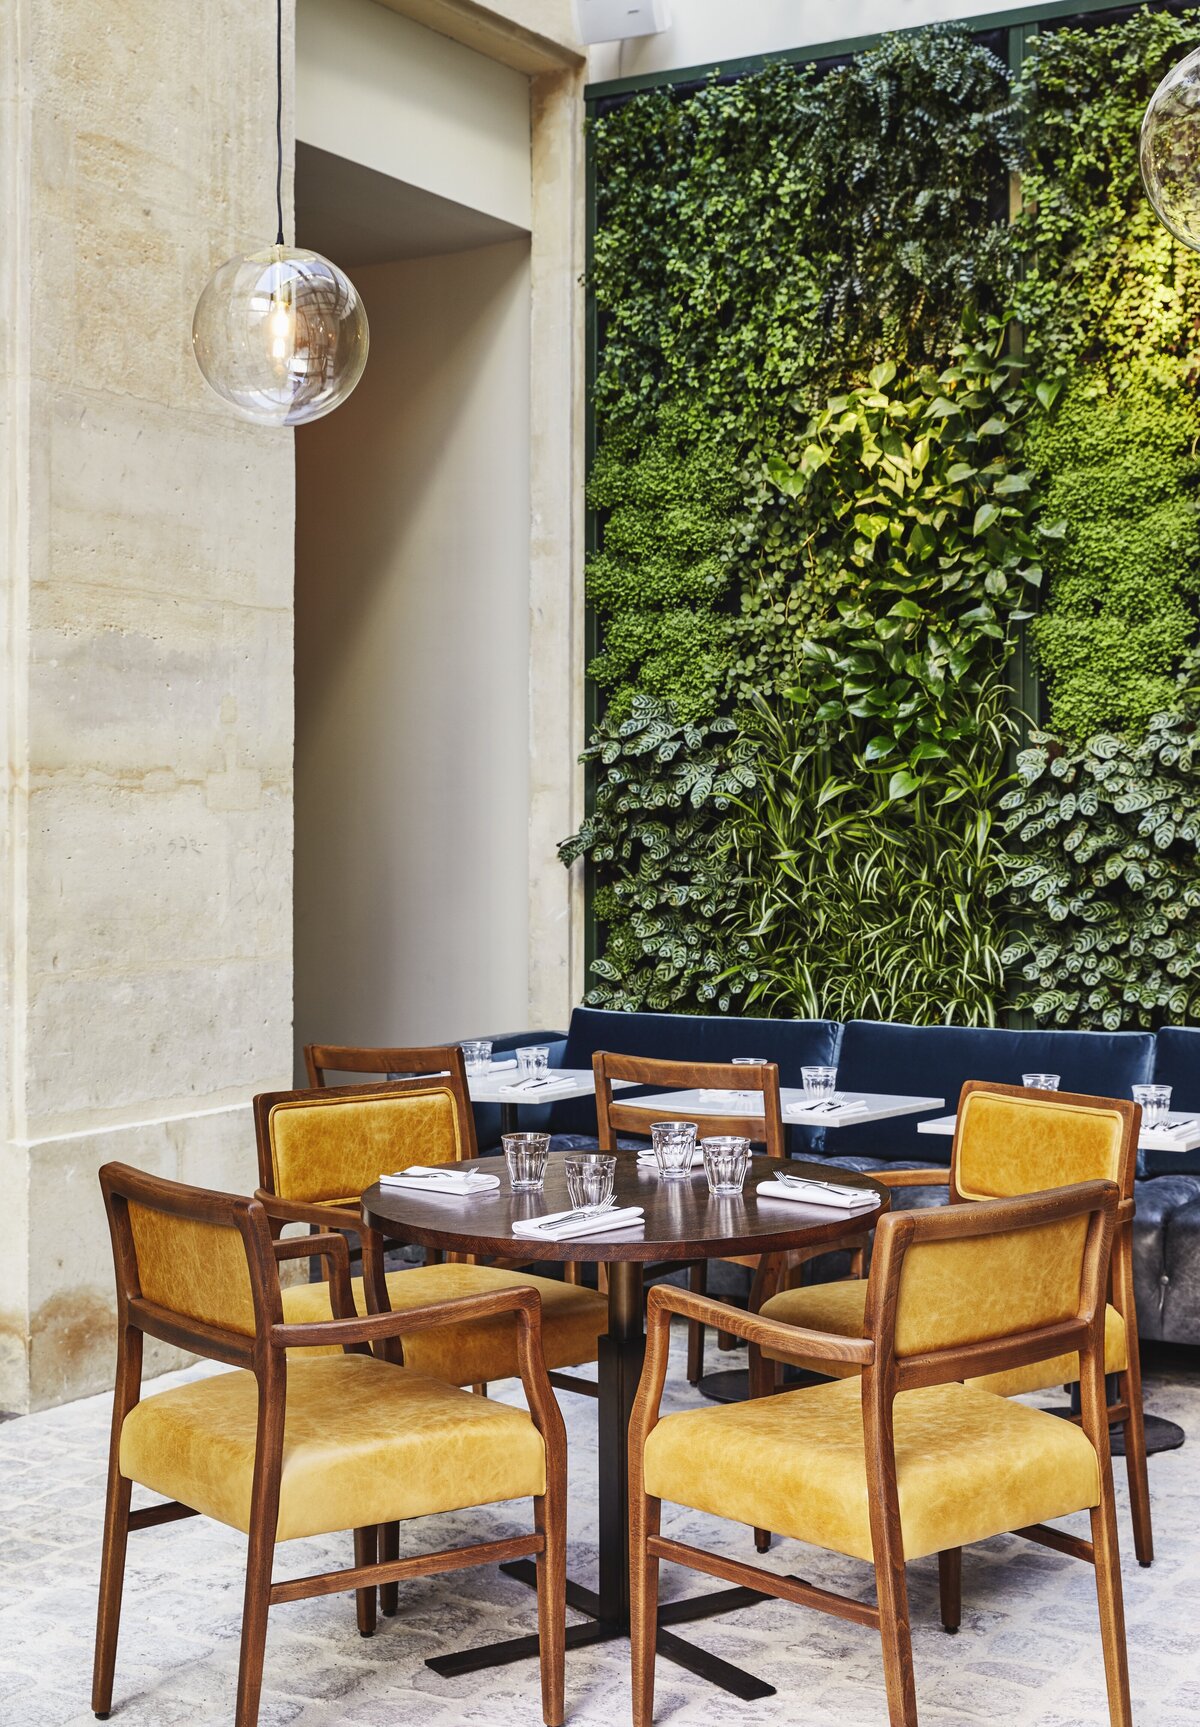 Restaurant with wooden table and wooden dining chairs with mustard colored leather upholstery. Green wall and limestone in the background